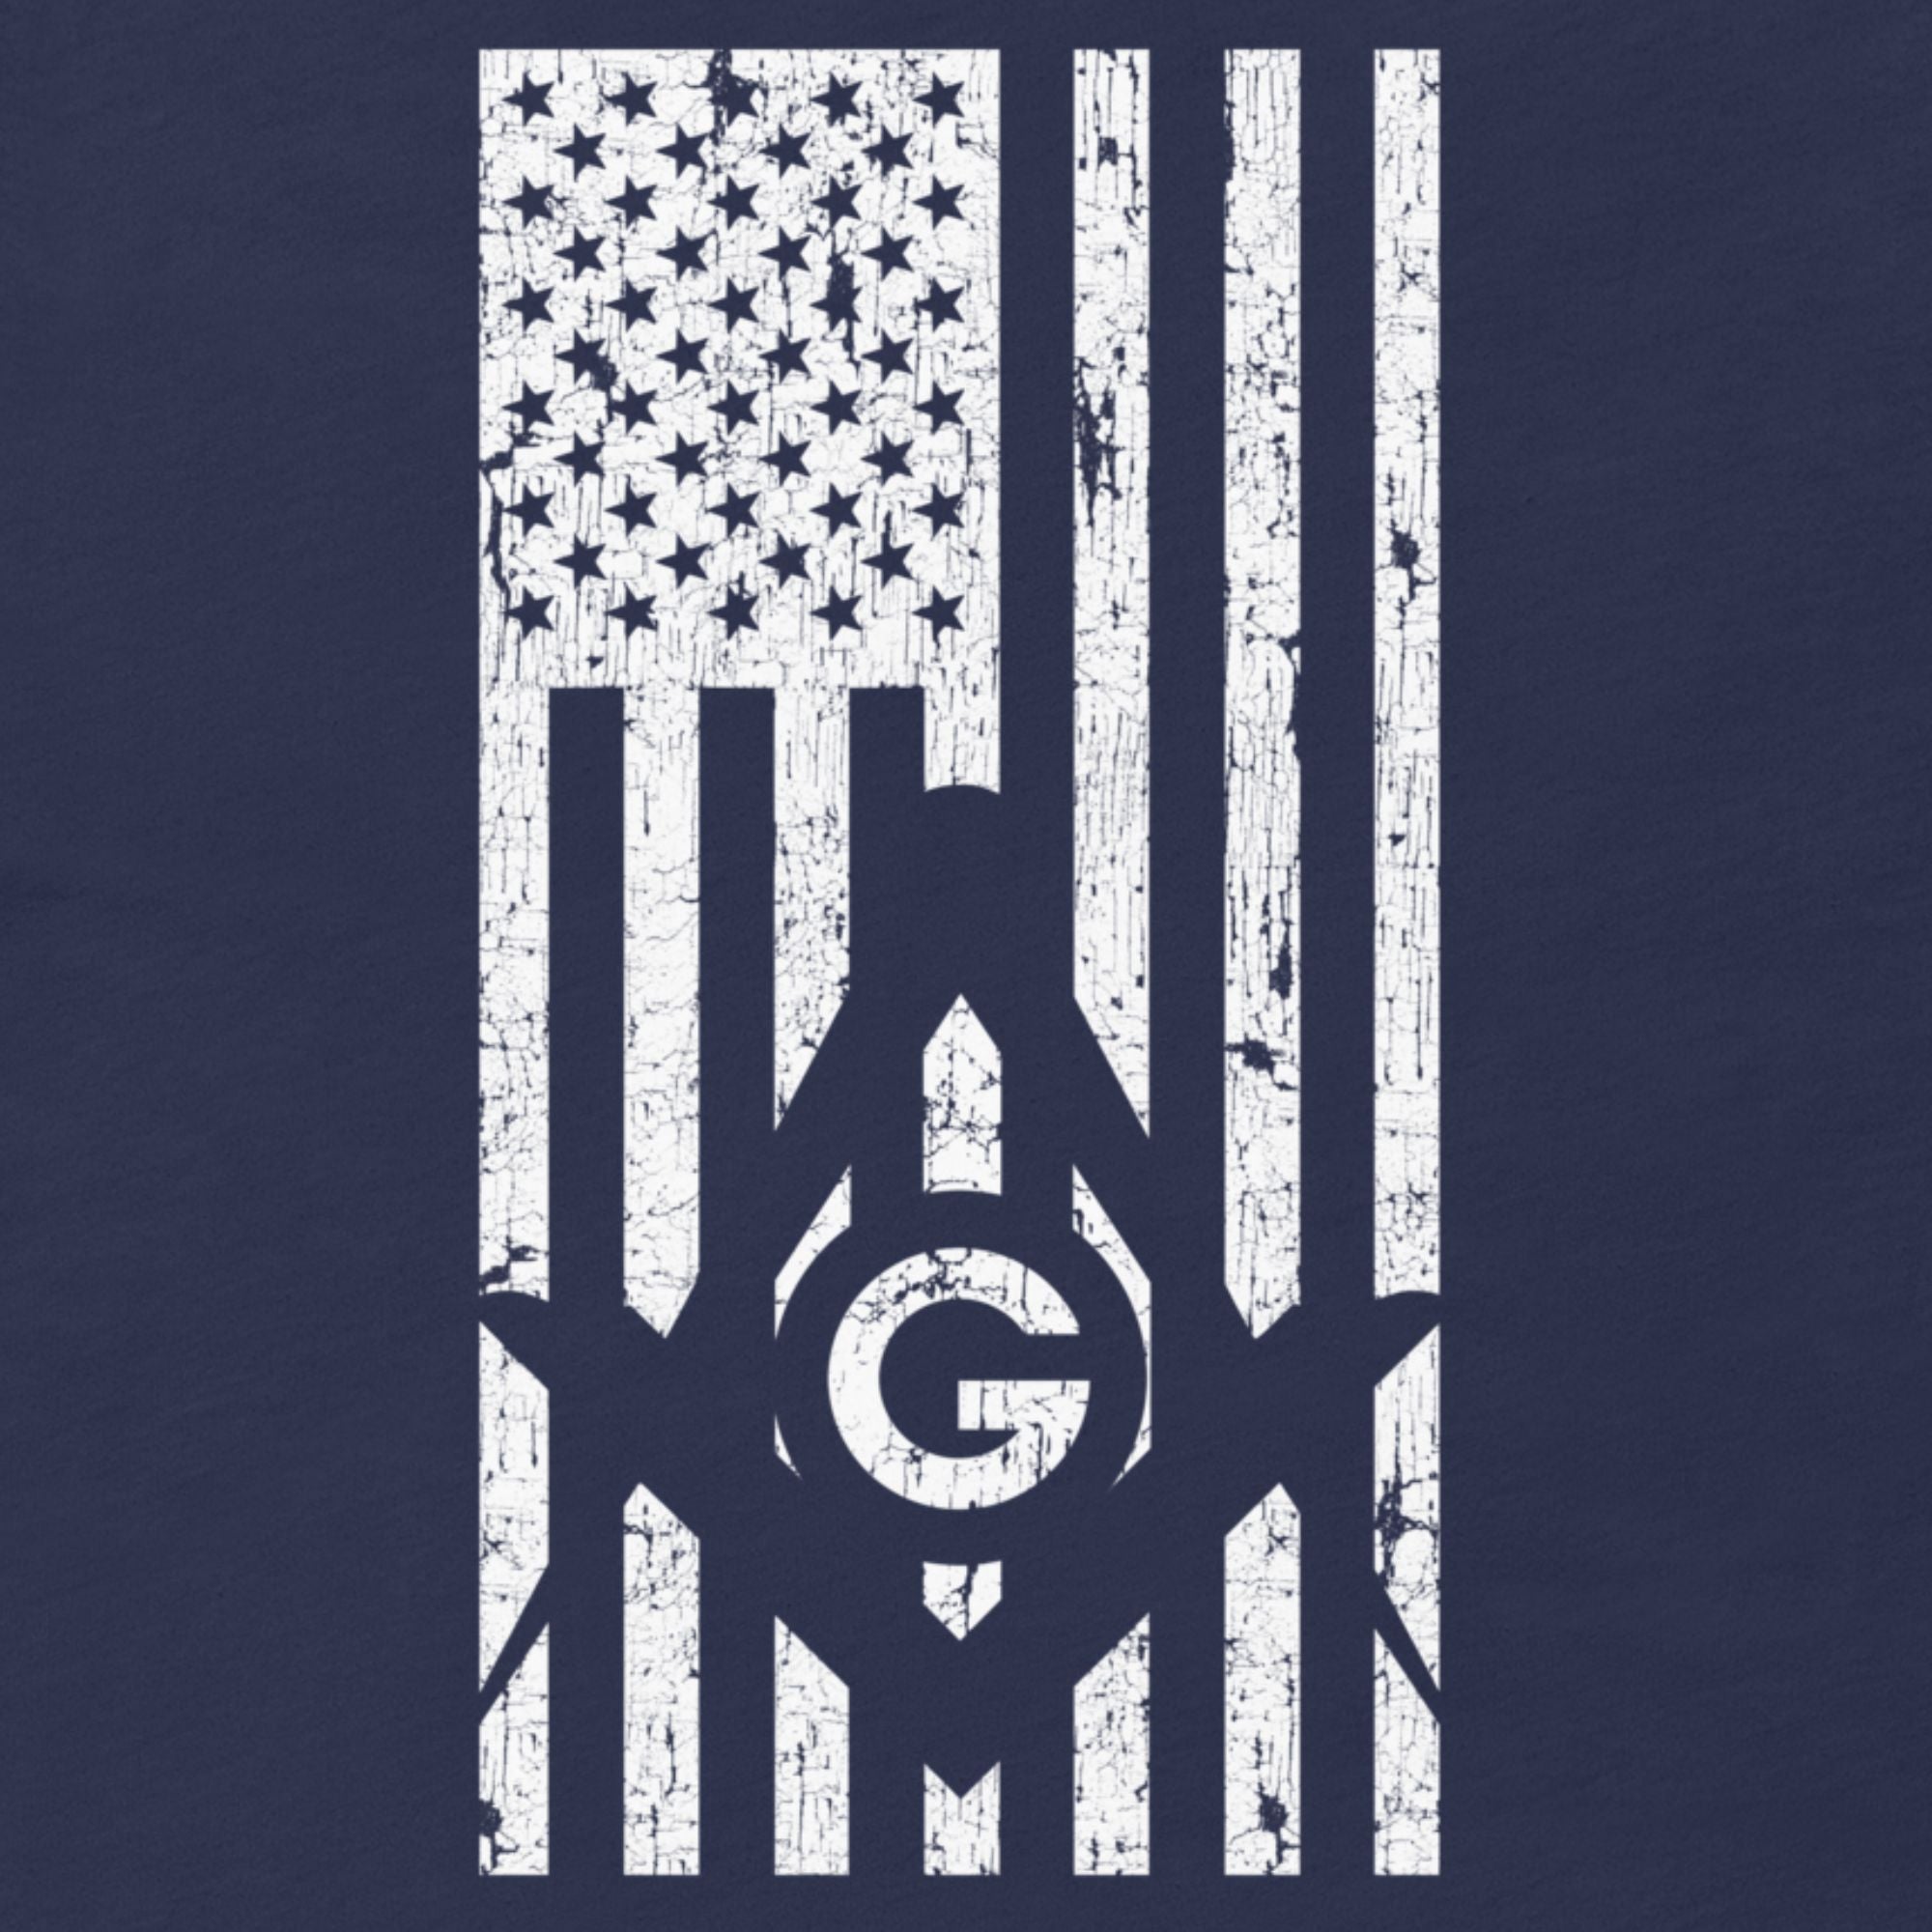 Square and Compass with G and Flag T-Shirt